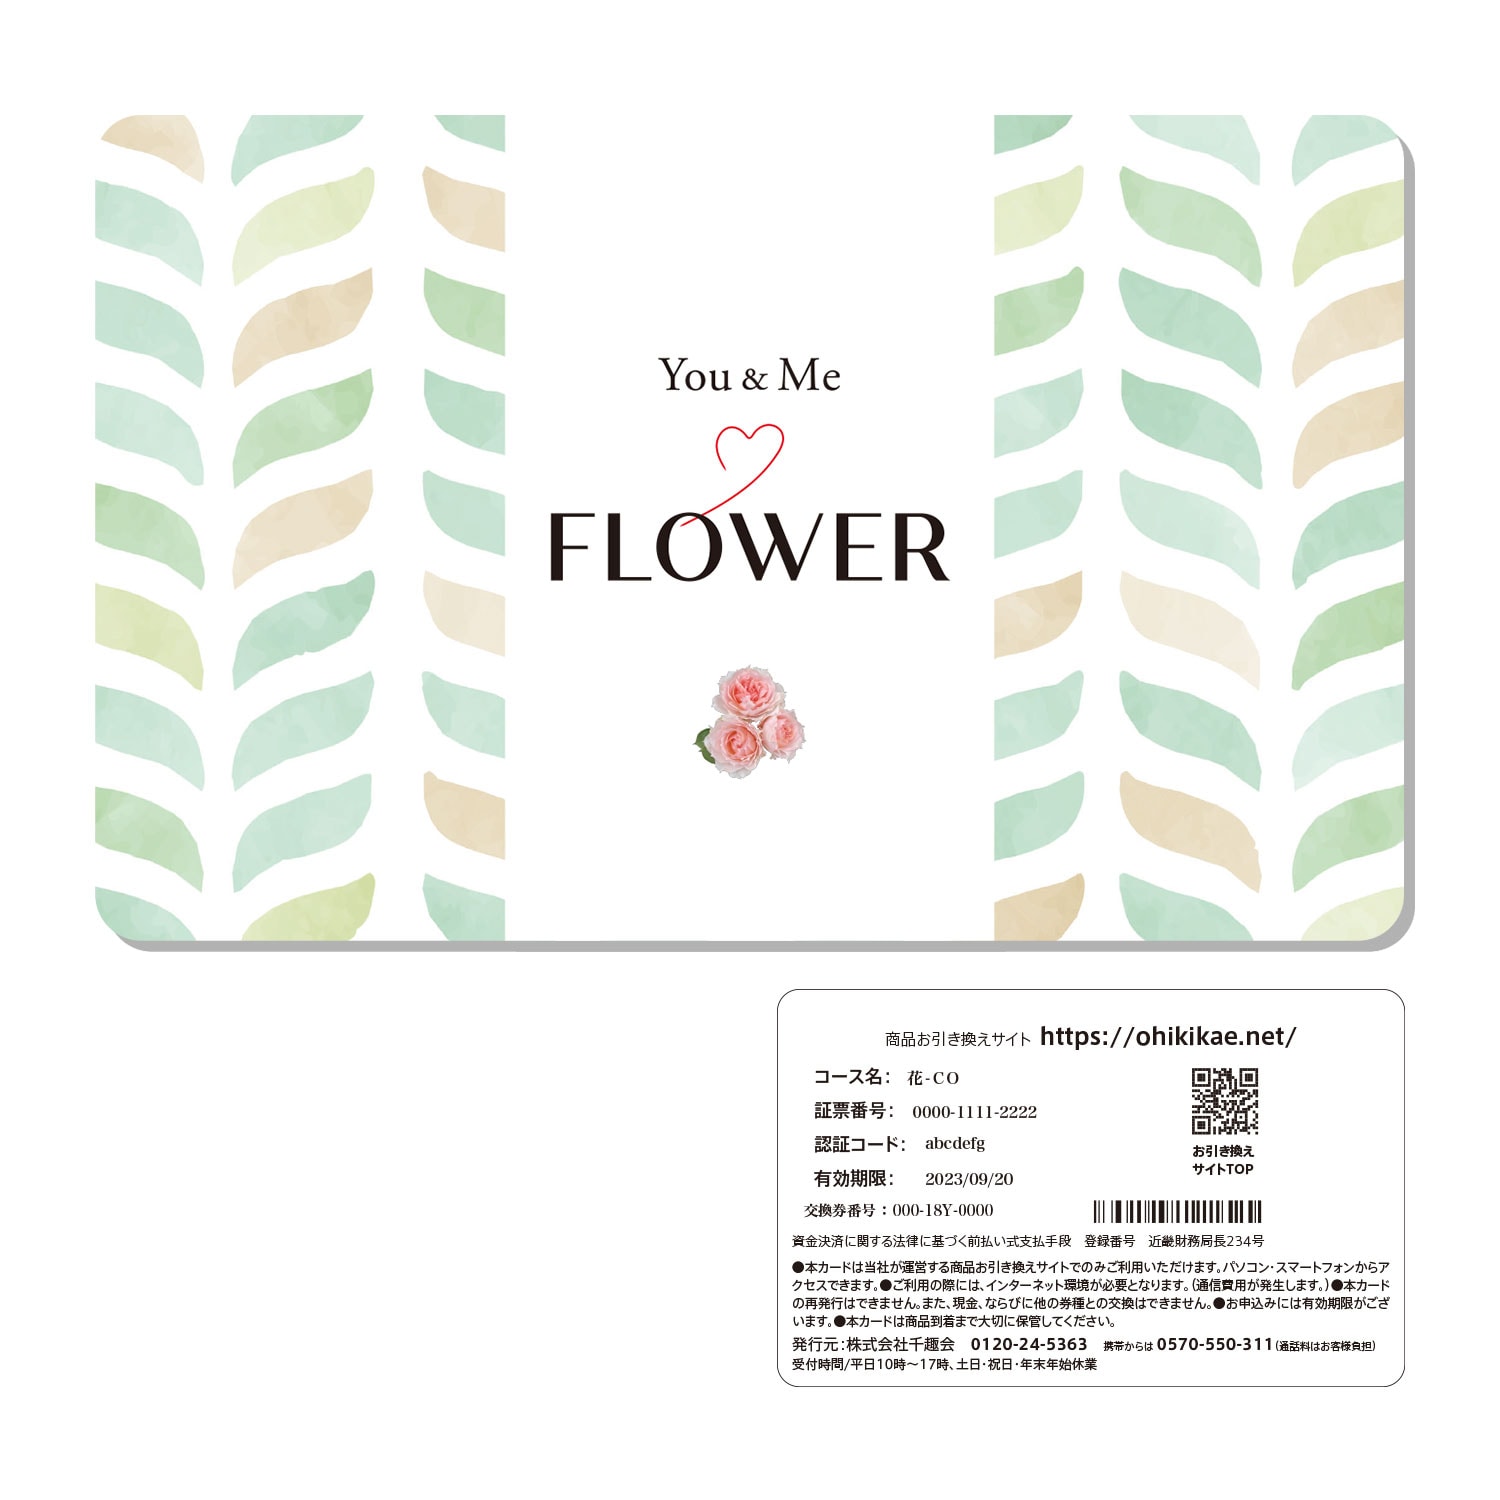 【You&Me】【送料無料】【カードギフト】花を愛するひとに お花ギフトカード「You&Me FLOWER」＜ＥＯ＞ - -,-